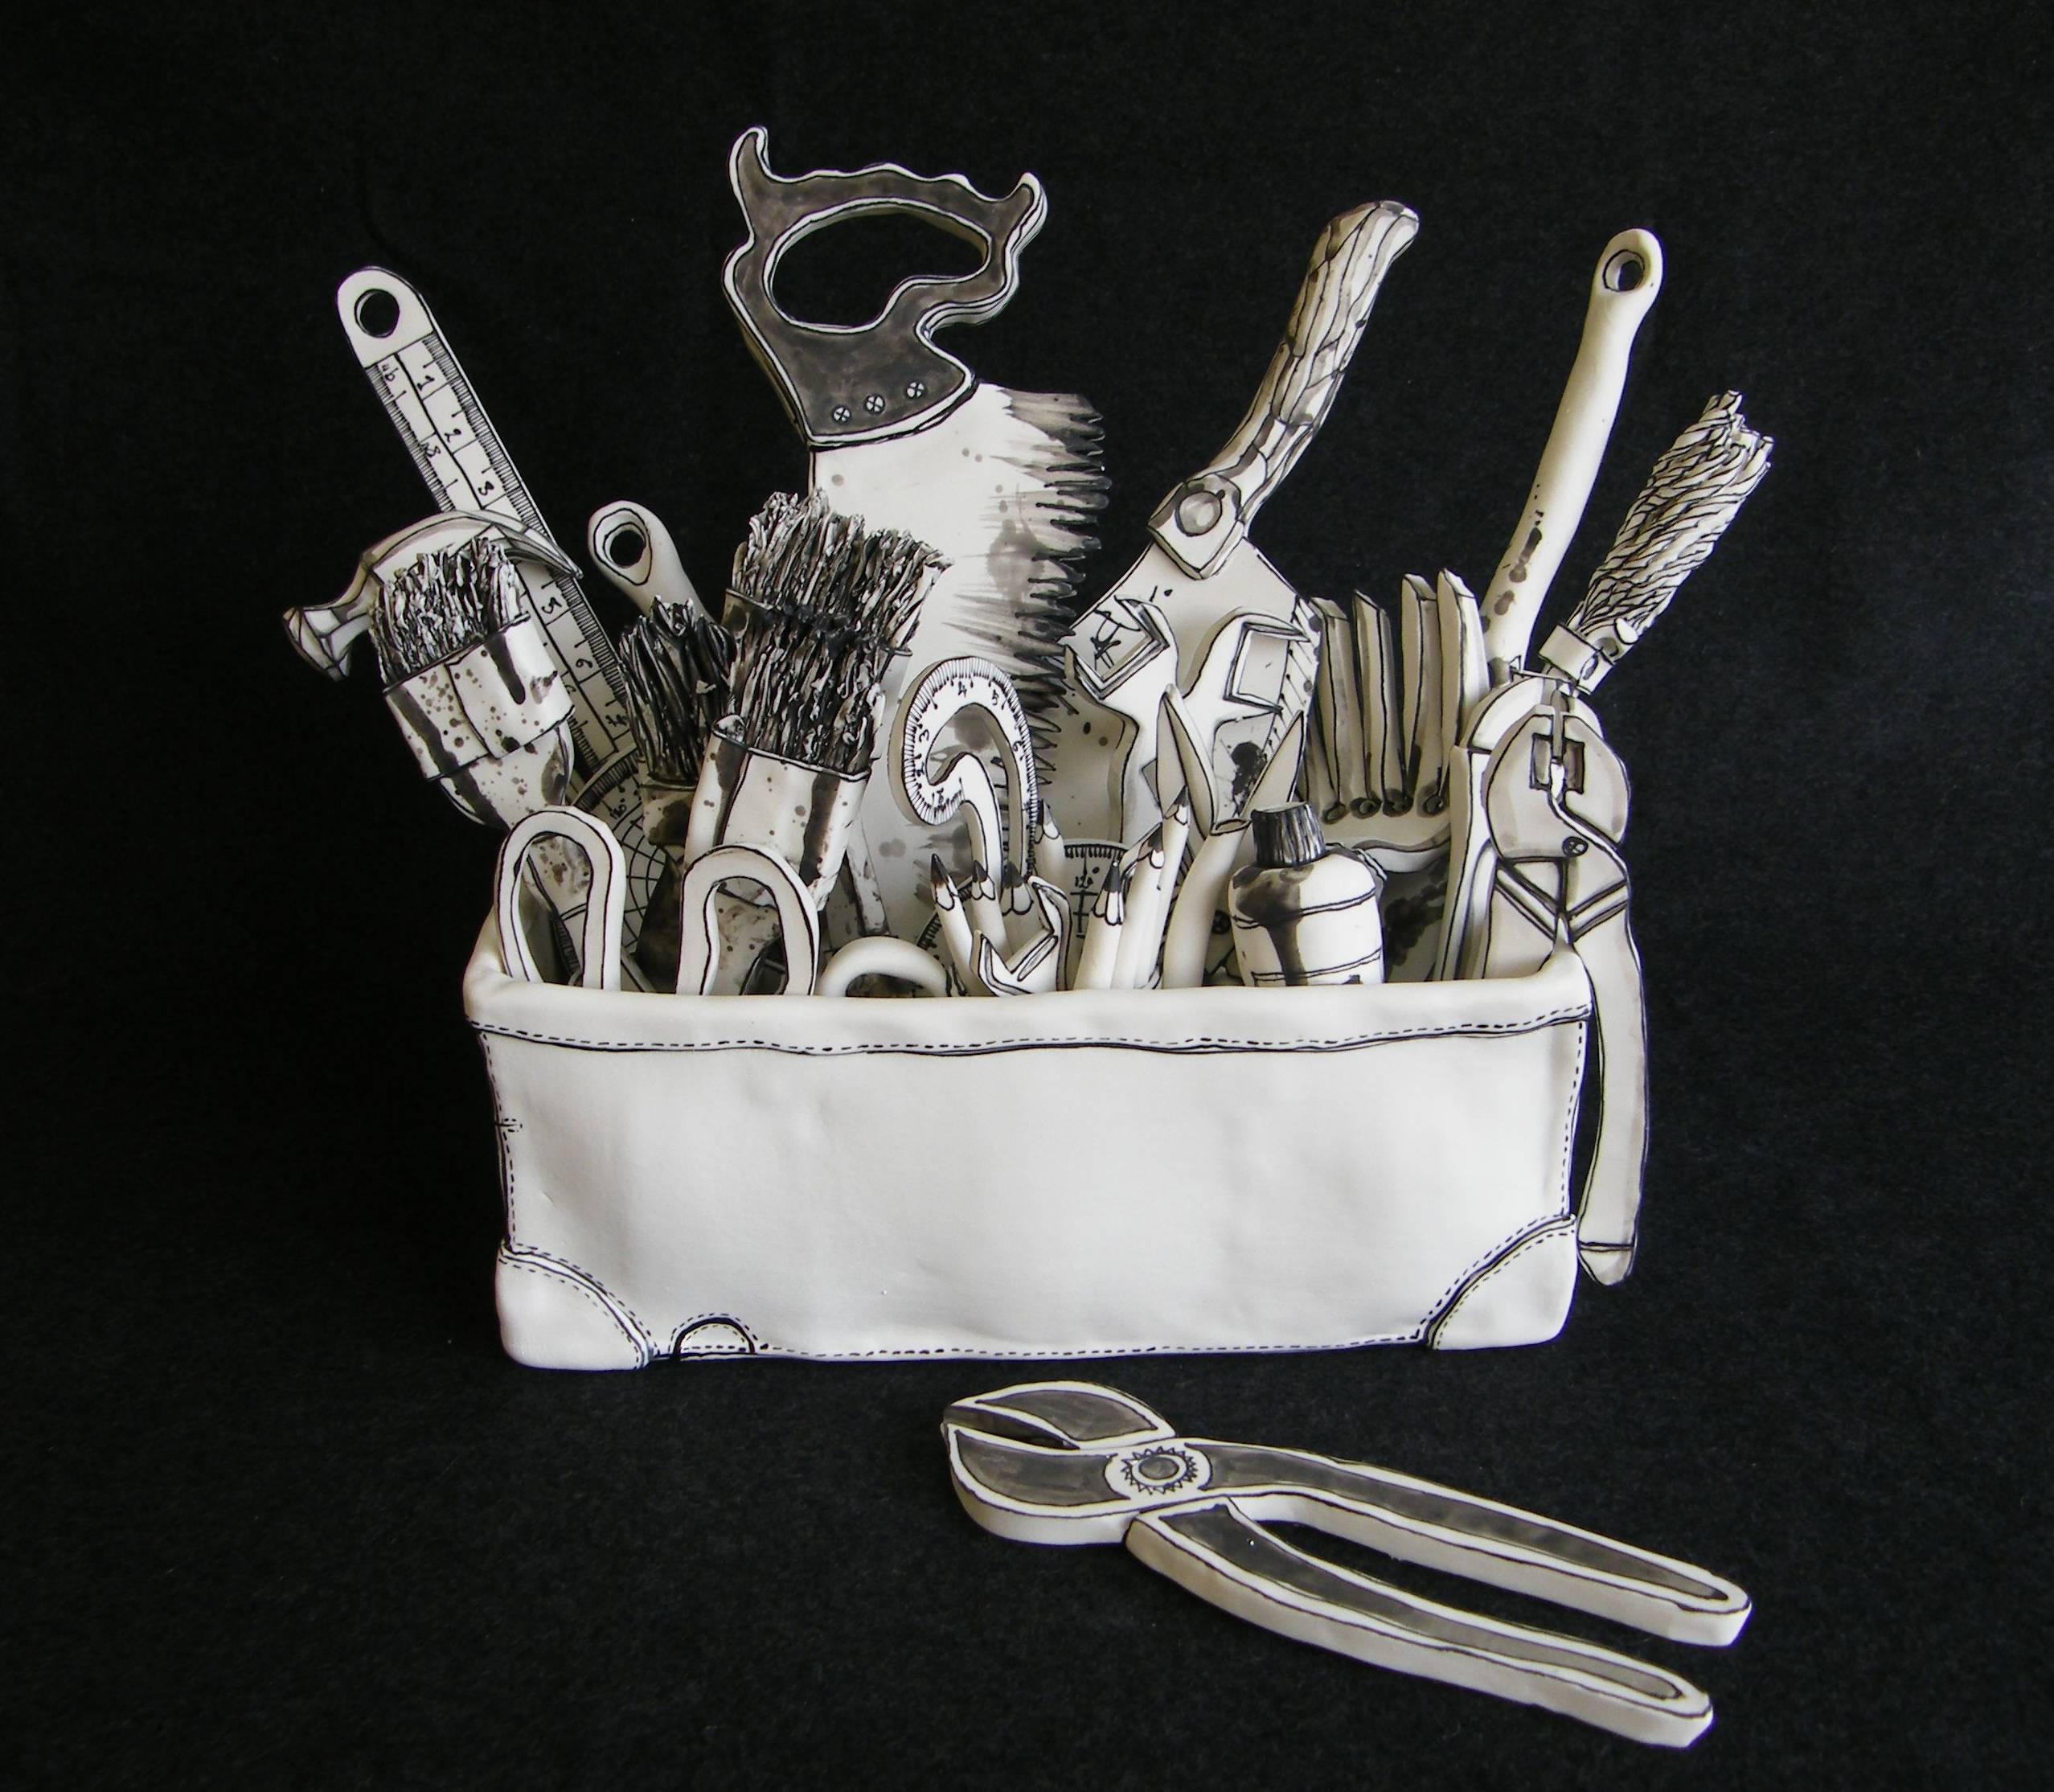 Katharine Morling Abstract Sculpture - "Toolbox", porcelain black and white sculpture installation w individual items